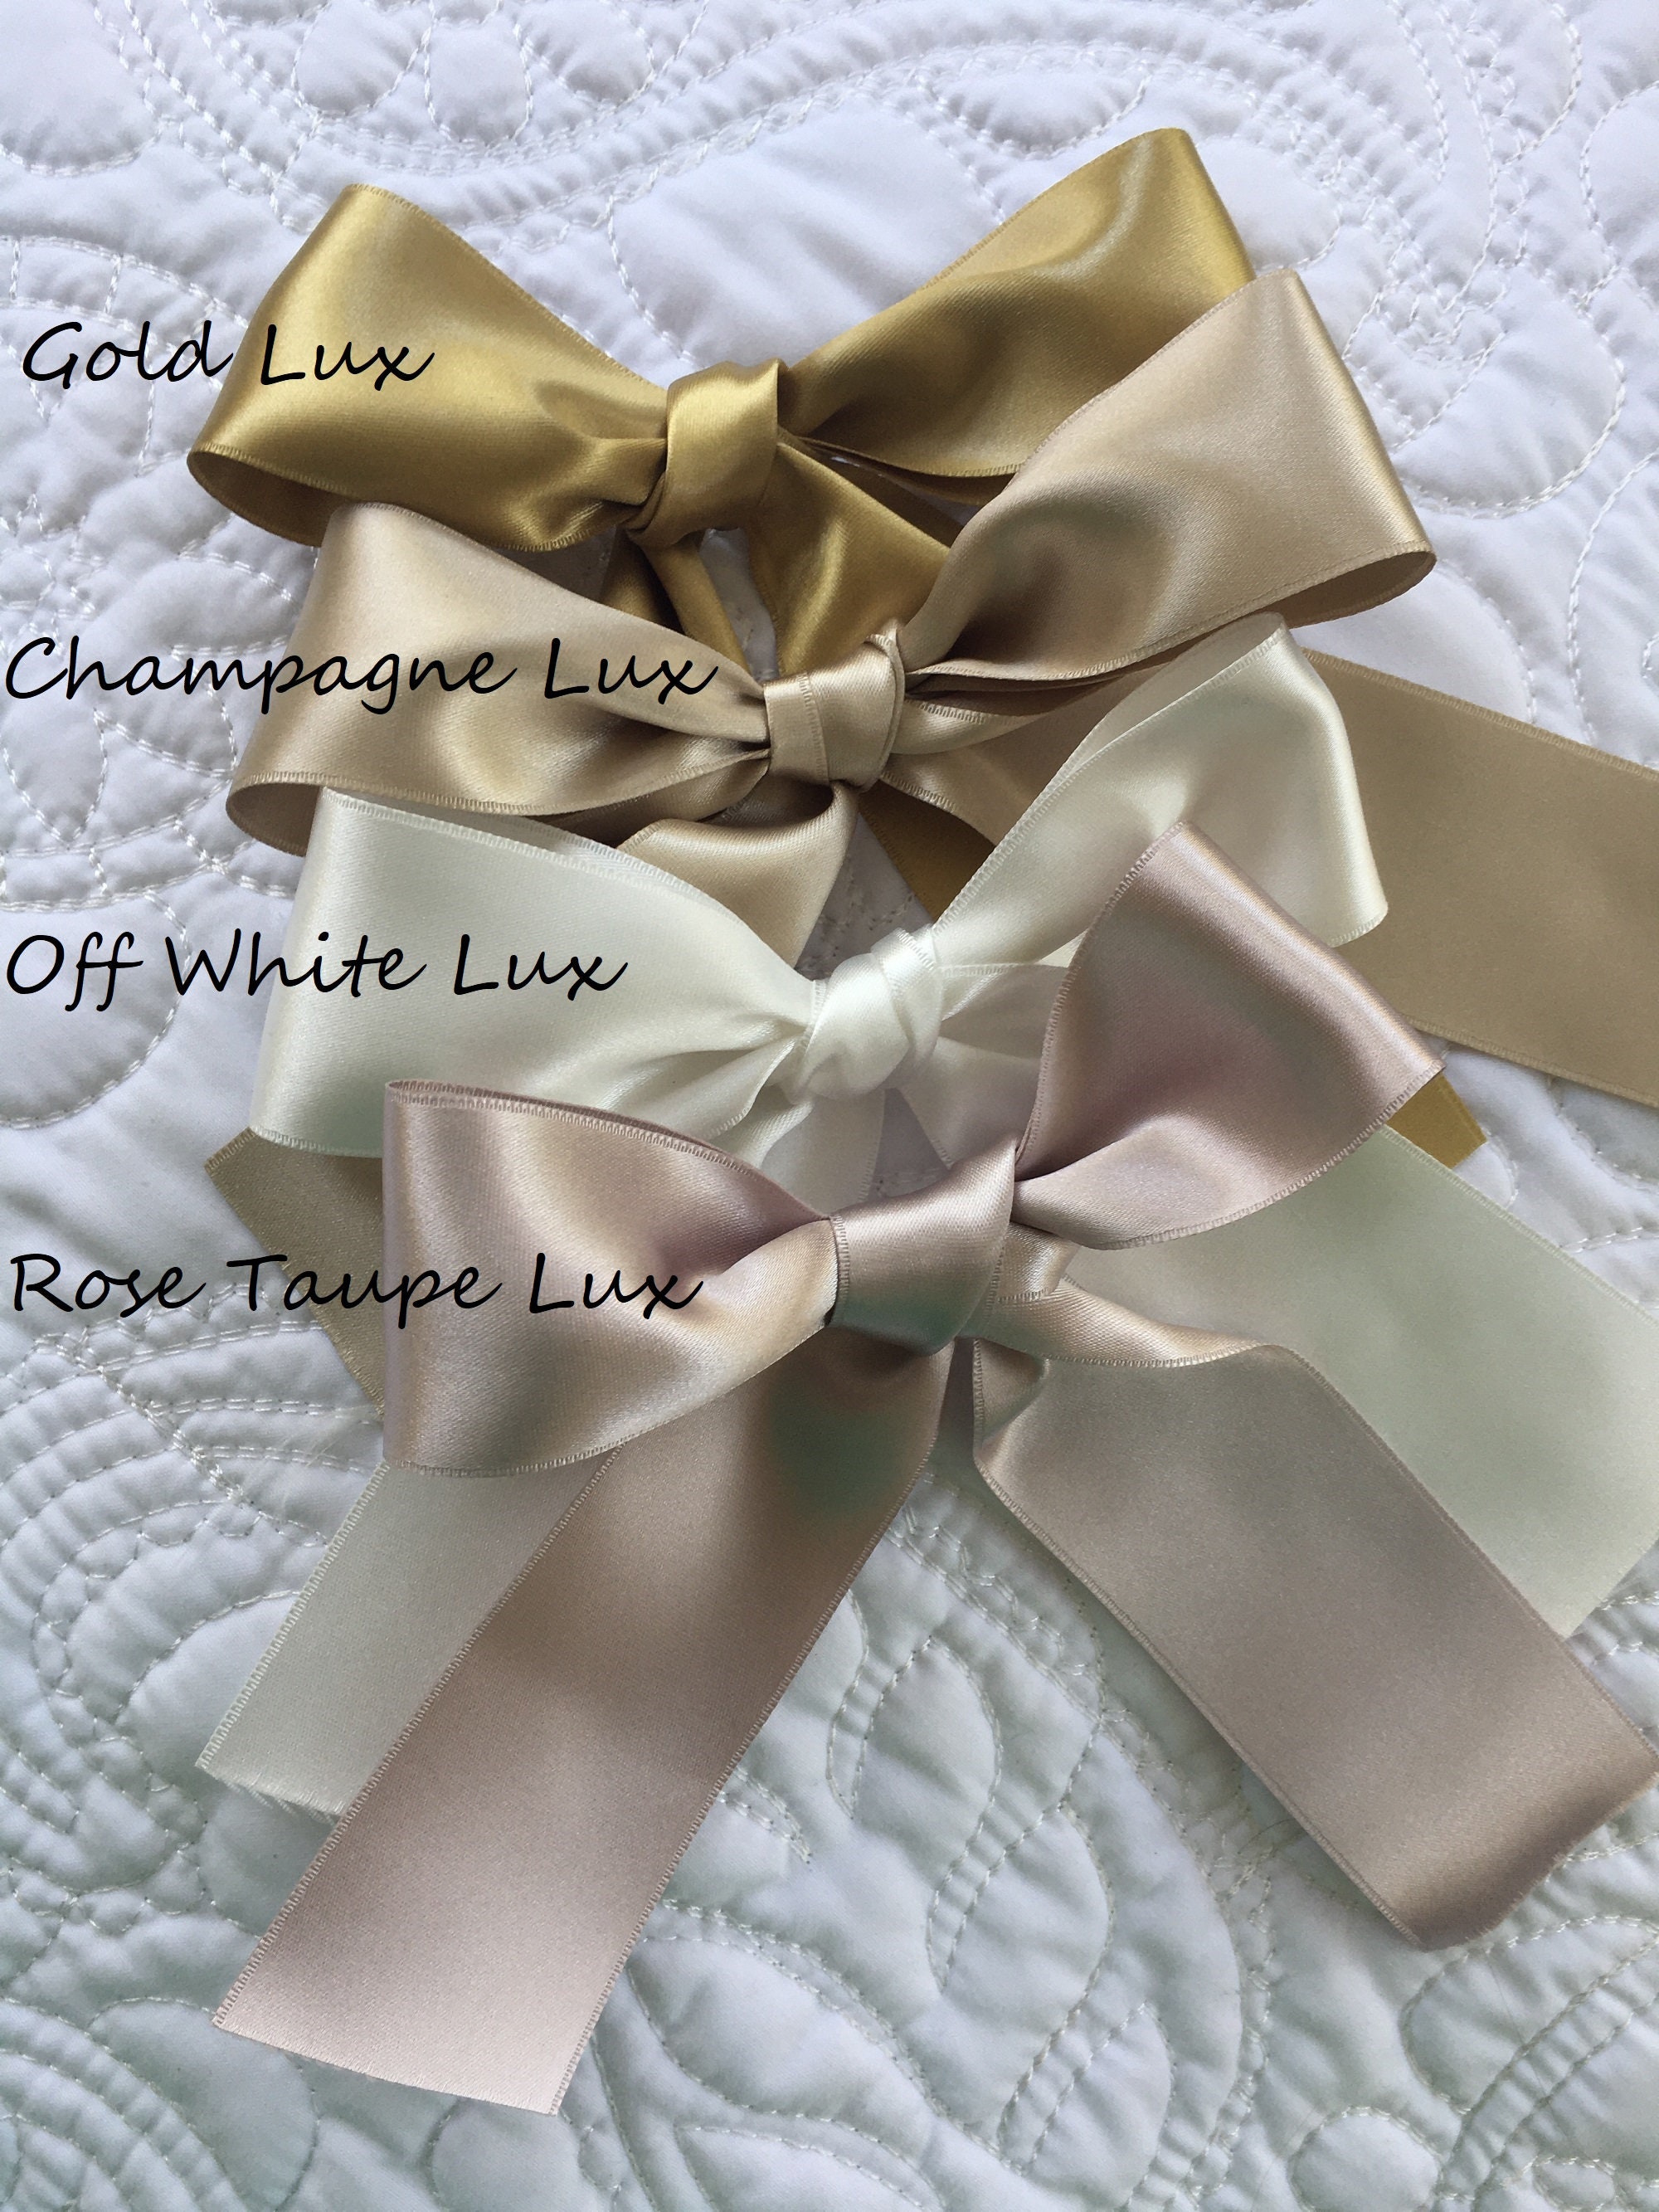 10 Rolls 250 Yards Satin Ribbons 1/4 inch DIY Craft Fabric Ribbon Mixed Colors for Making Bows Wedding Party Christmas Decorations Gifts Wrapping